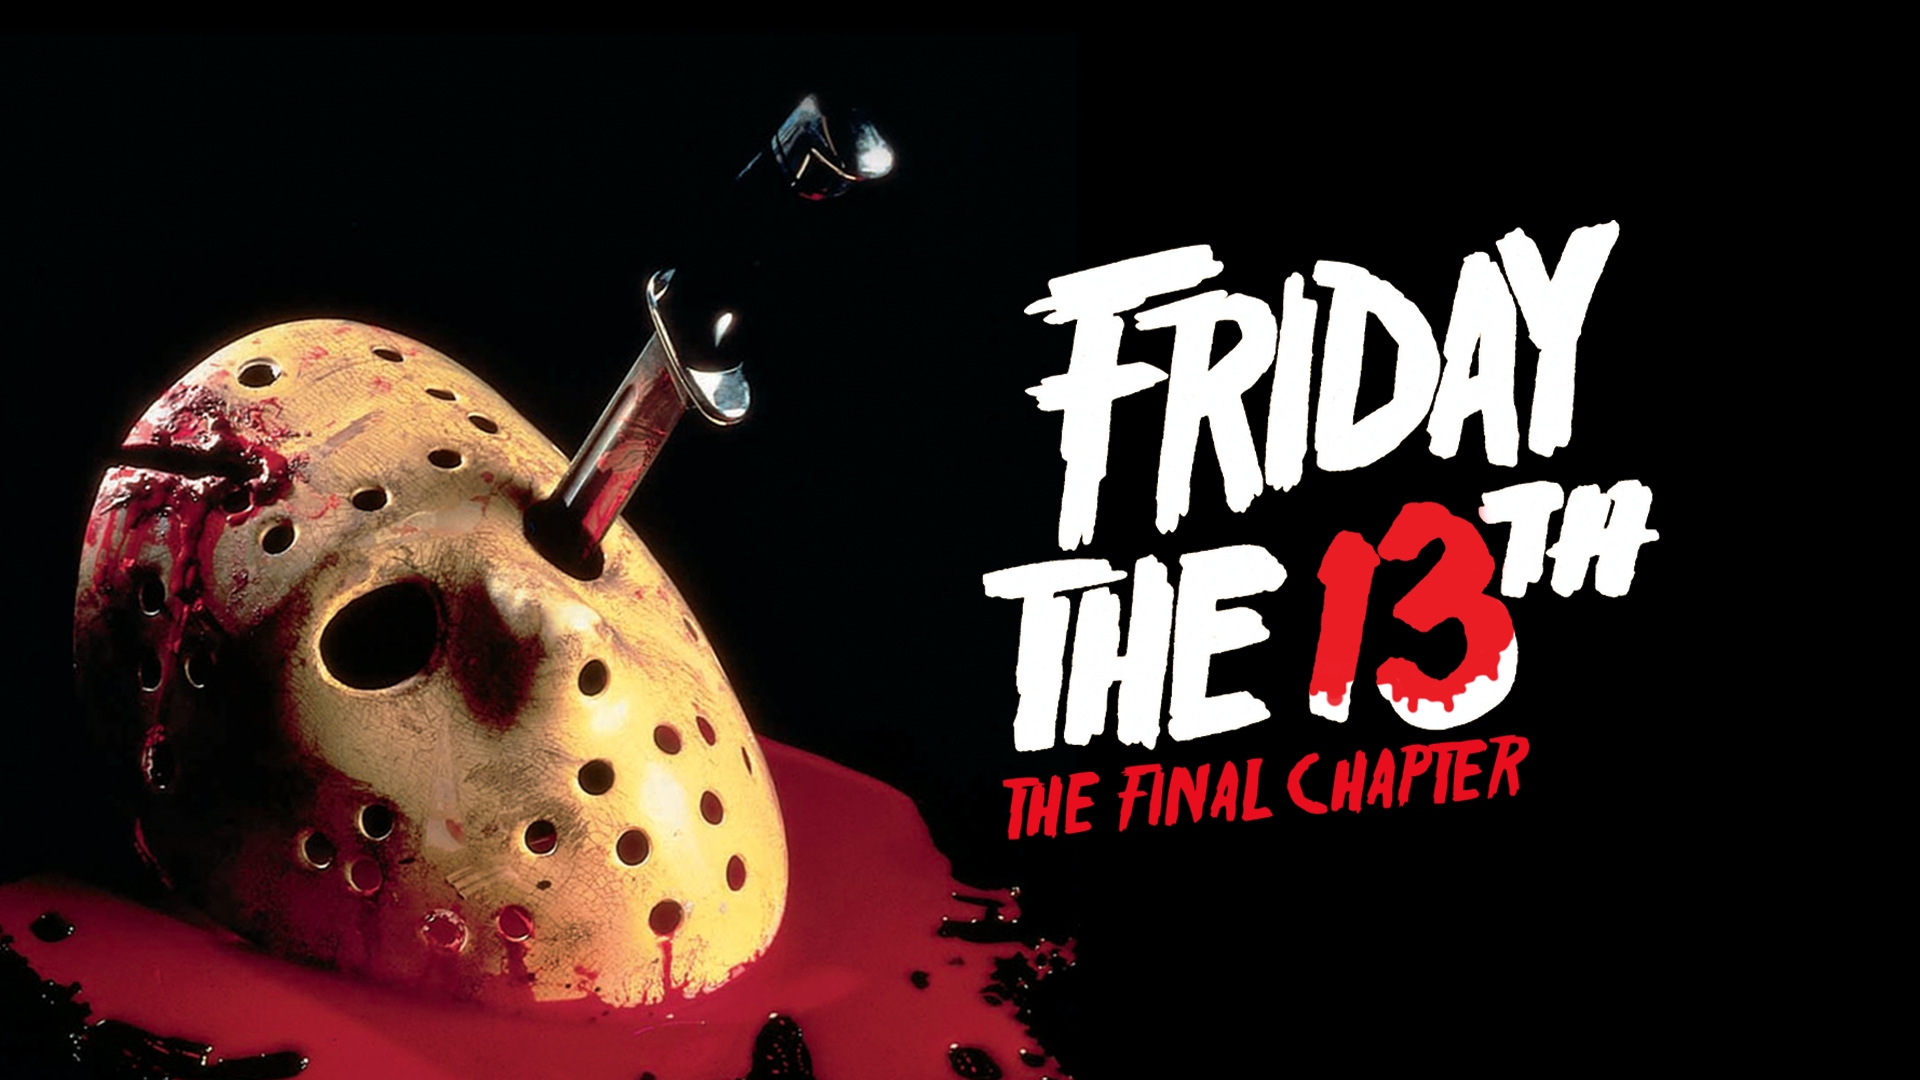 Stream Friday The 13th Part IV The Final Chapter Online Download and